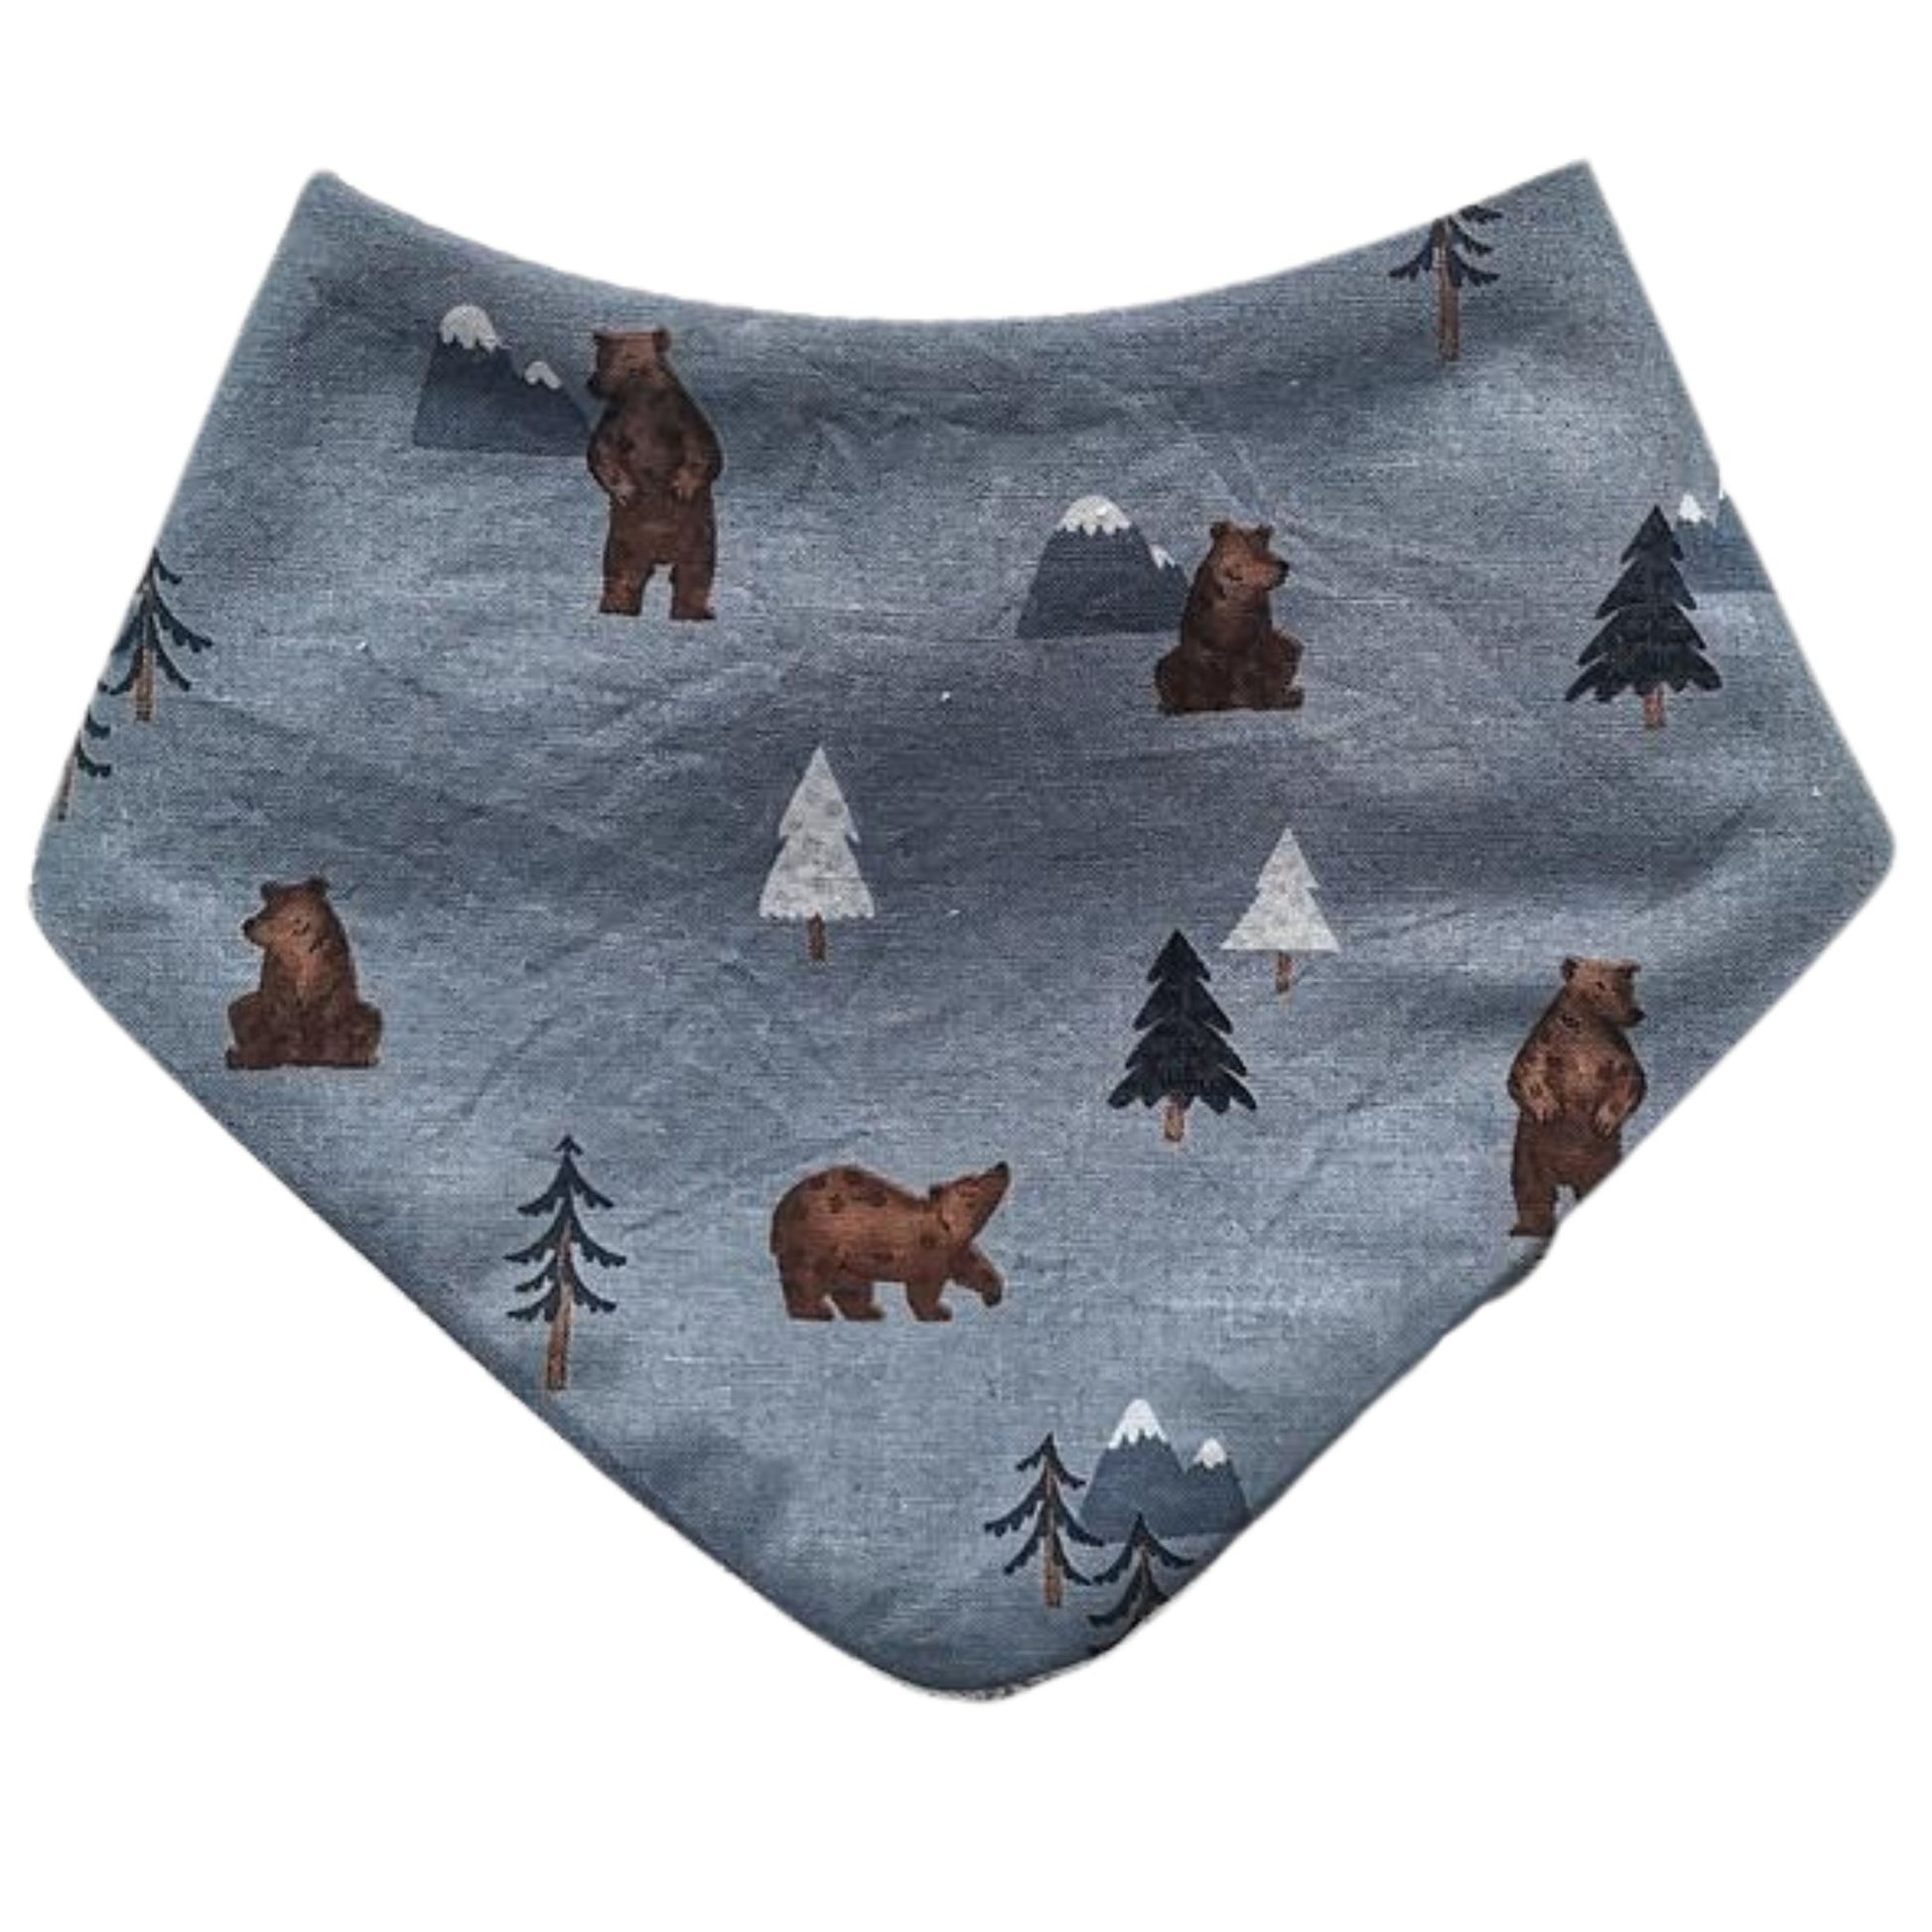 Baby dribble bib in dusky blue fabric with bears and pine trees printed on it.